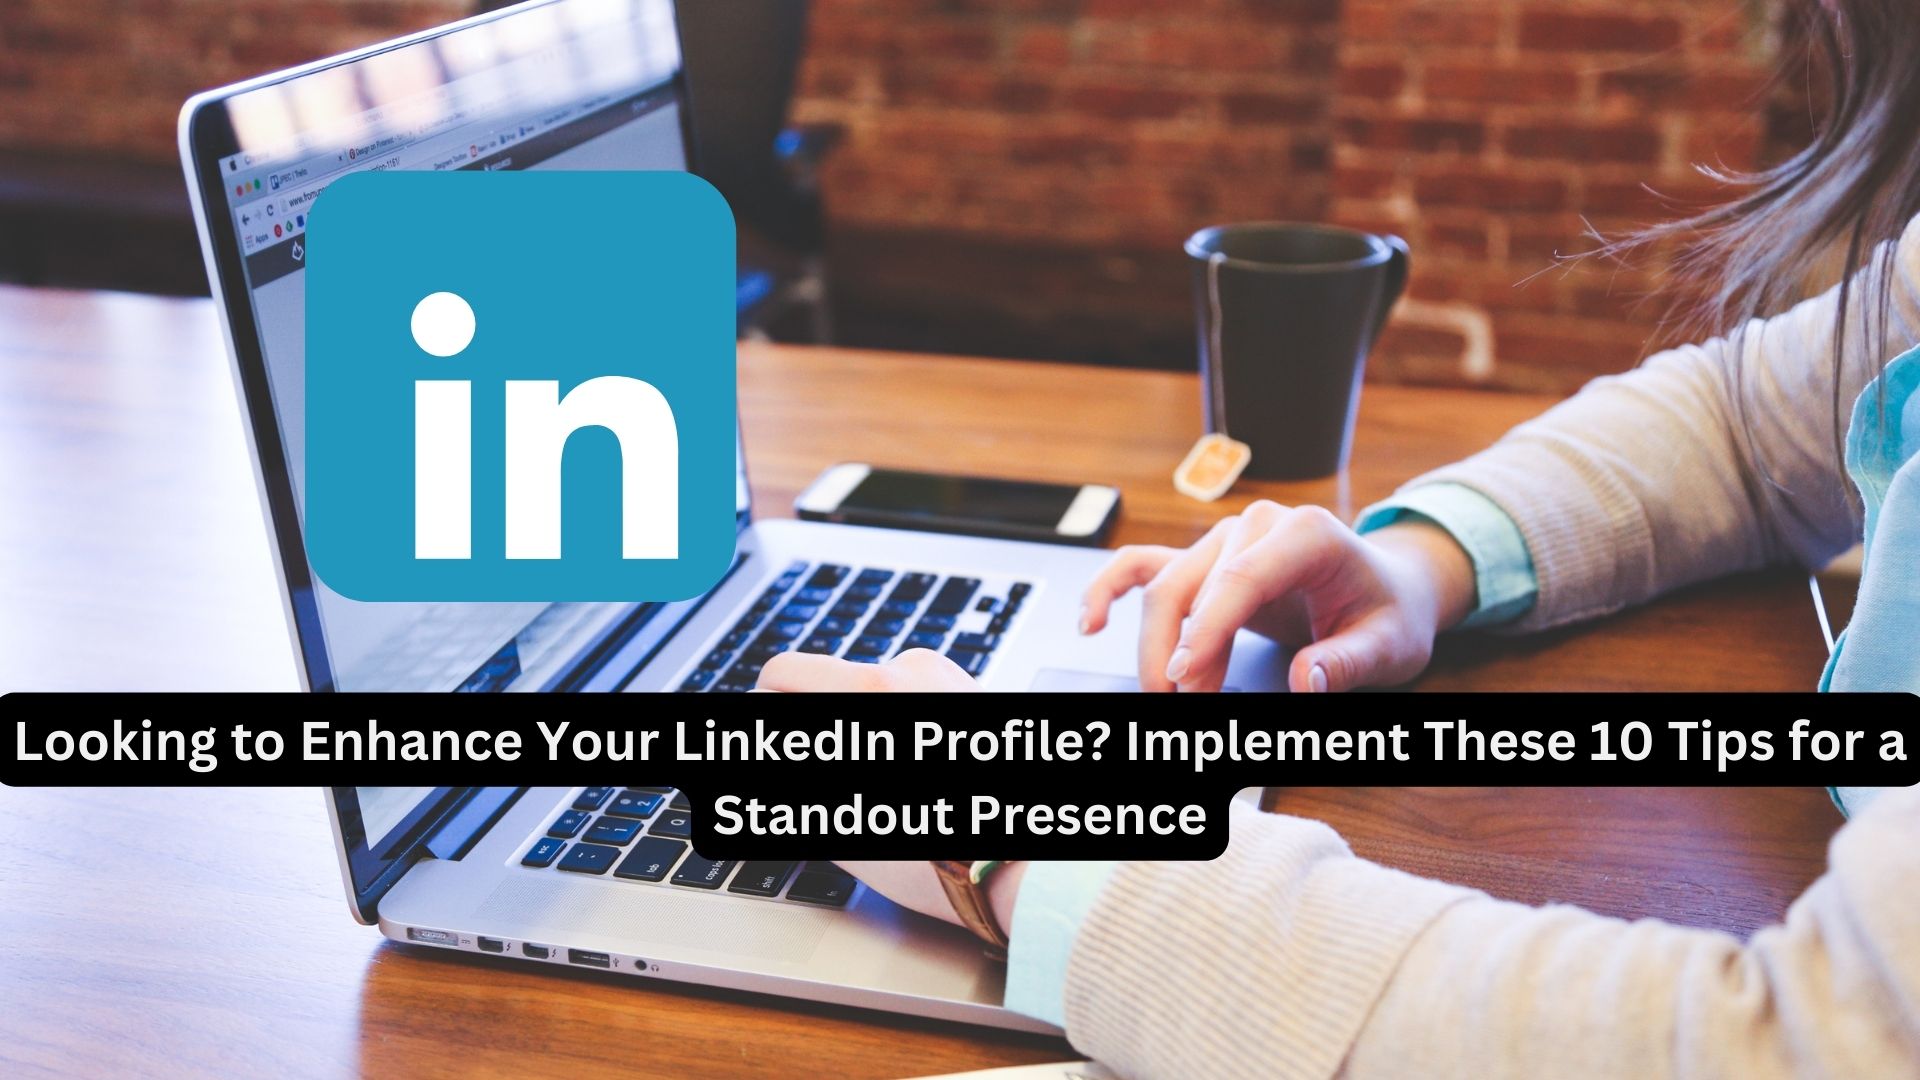 Looking to Enhance Your LinkedIn Profile? Implement These 10 Tips for a Standout Presence